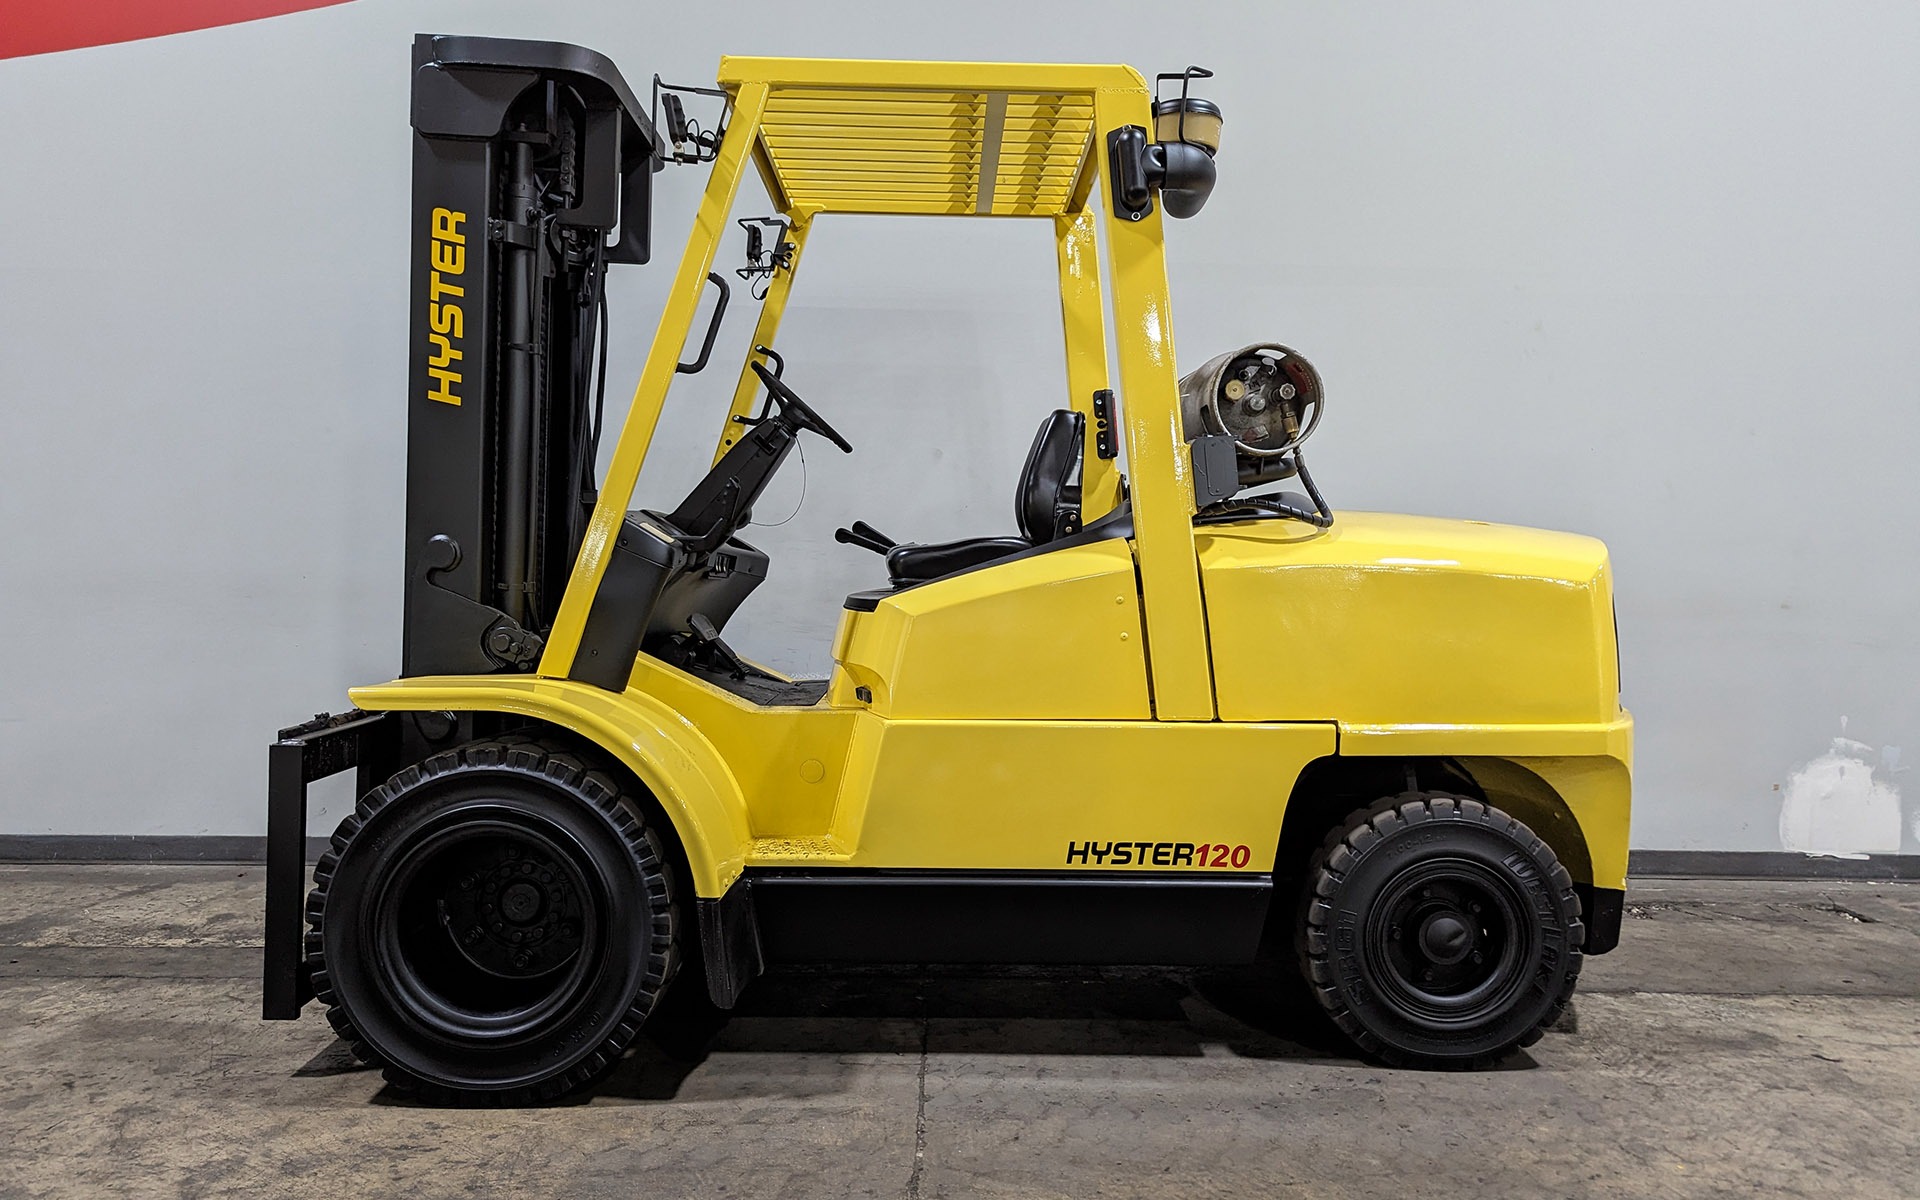 2005 HYSTER H120XM